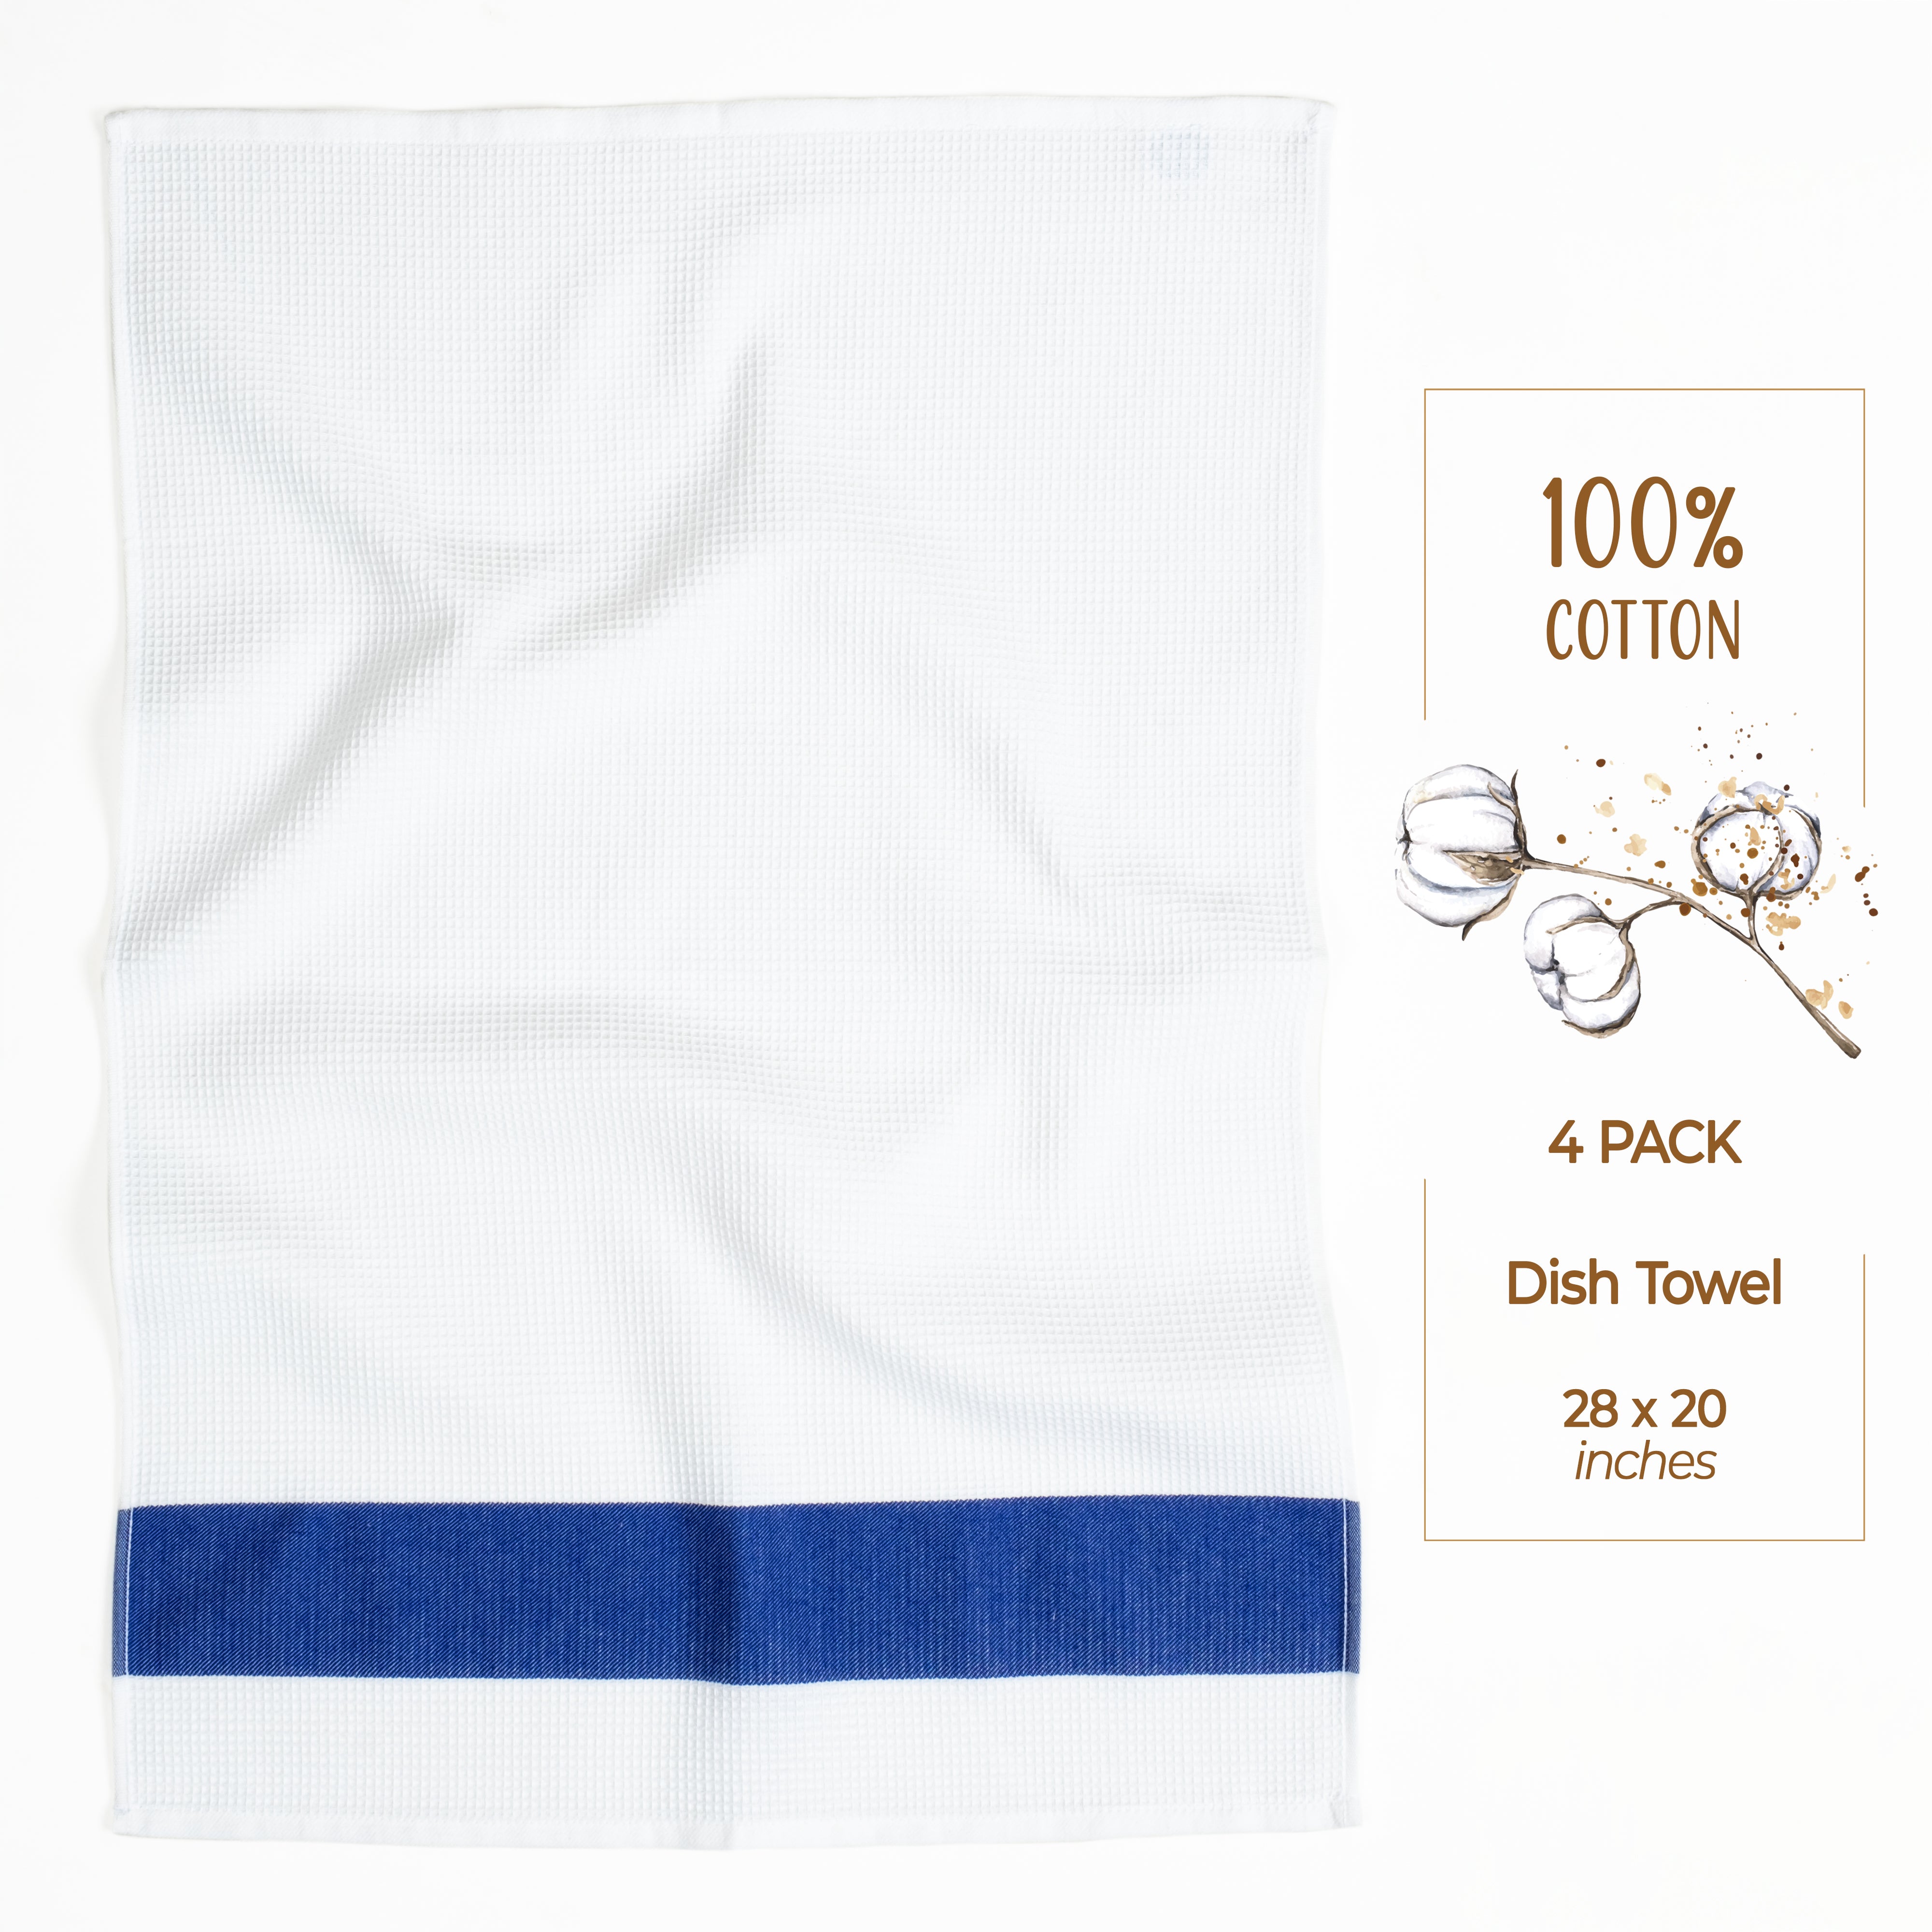 American Soft Linen 4 Packed Dish Towels, 100% Cotton Dish Cloths for Kitchen navy-blue-3